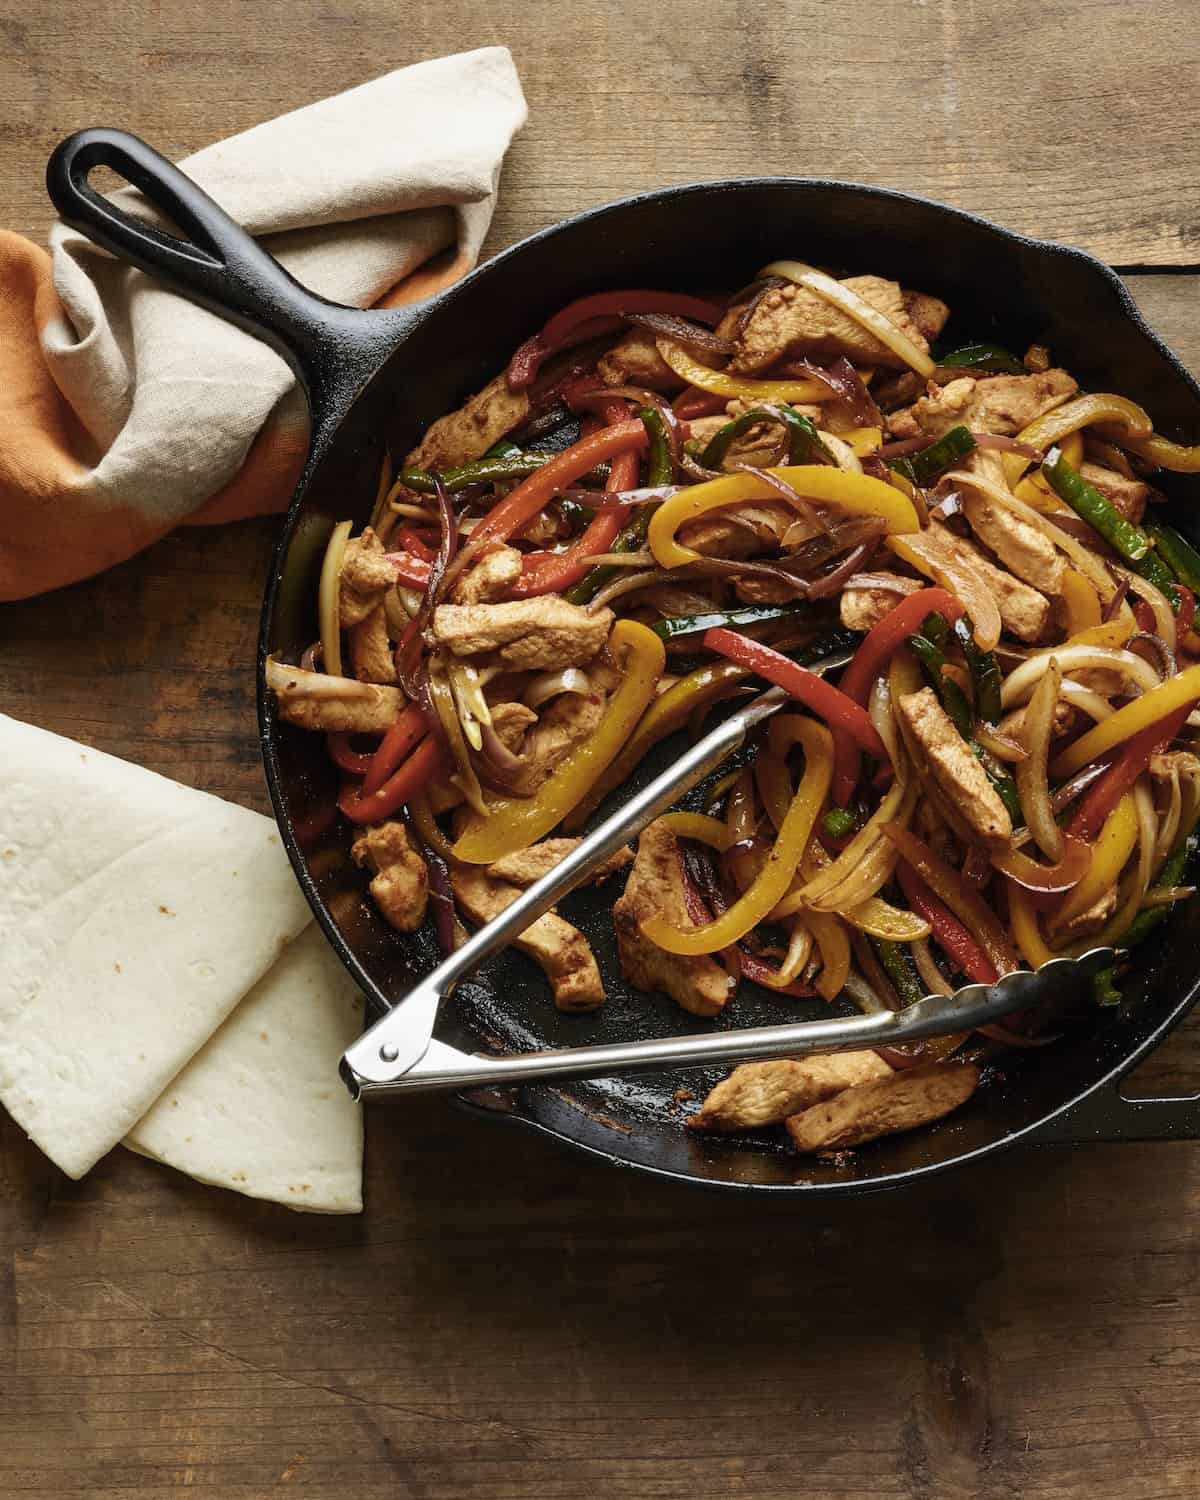 A cast iron with poblano pepper chicken fajitas with tongs to serve, along with a folded tortillas and a kitchen towel to hold the cast iron.